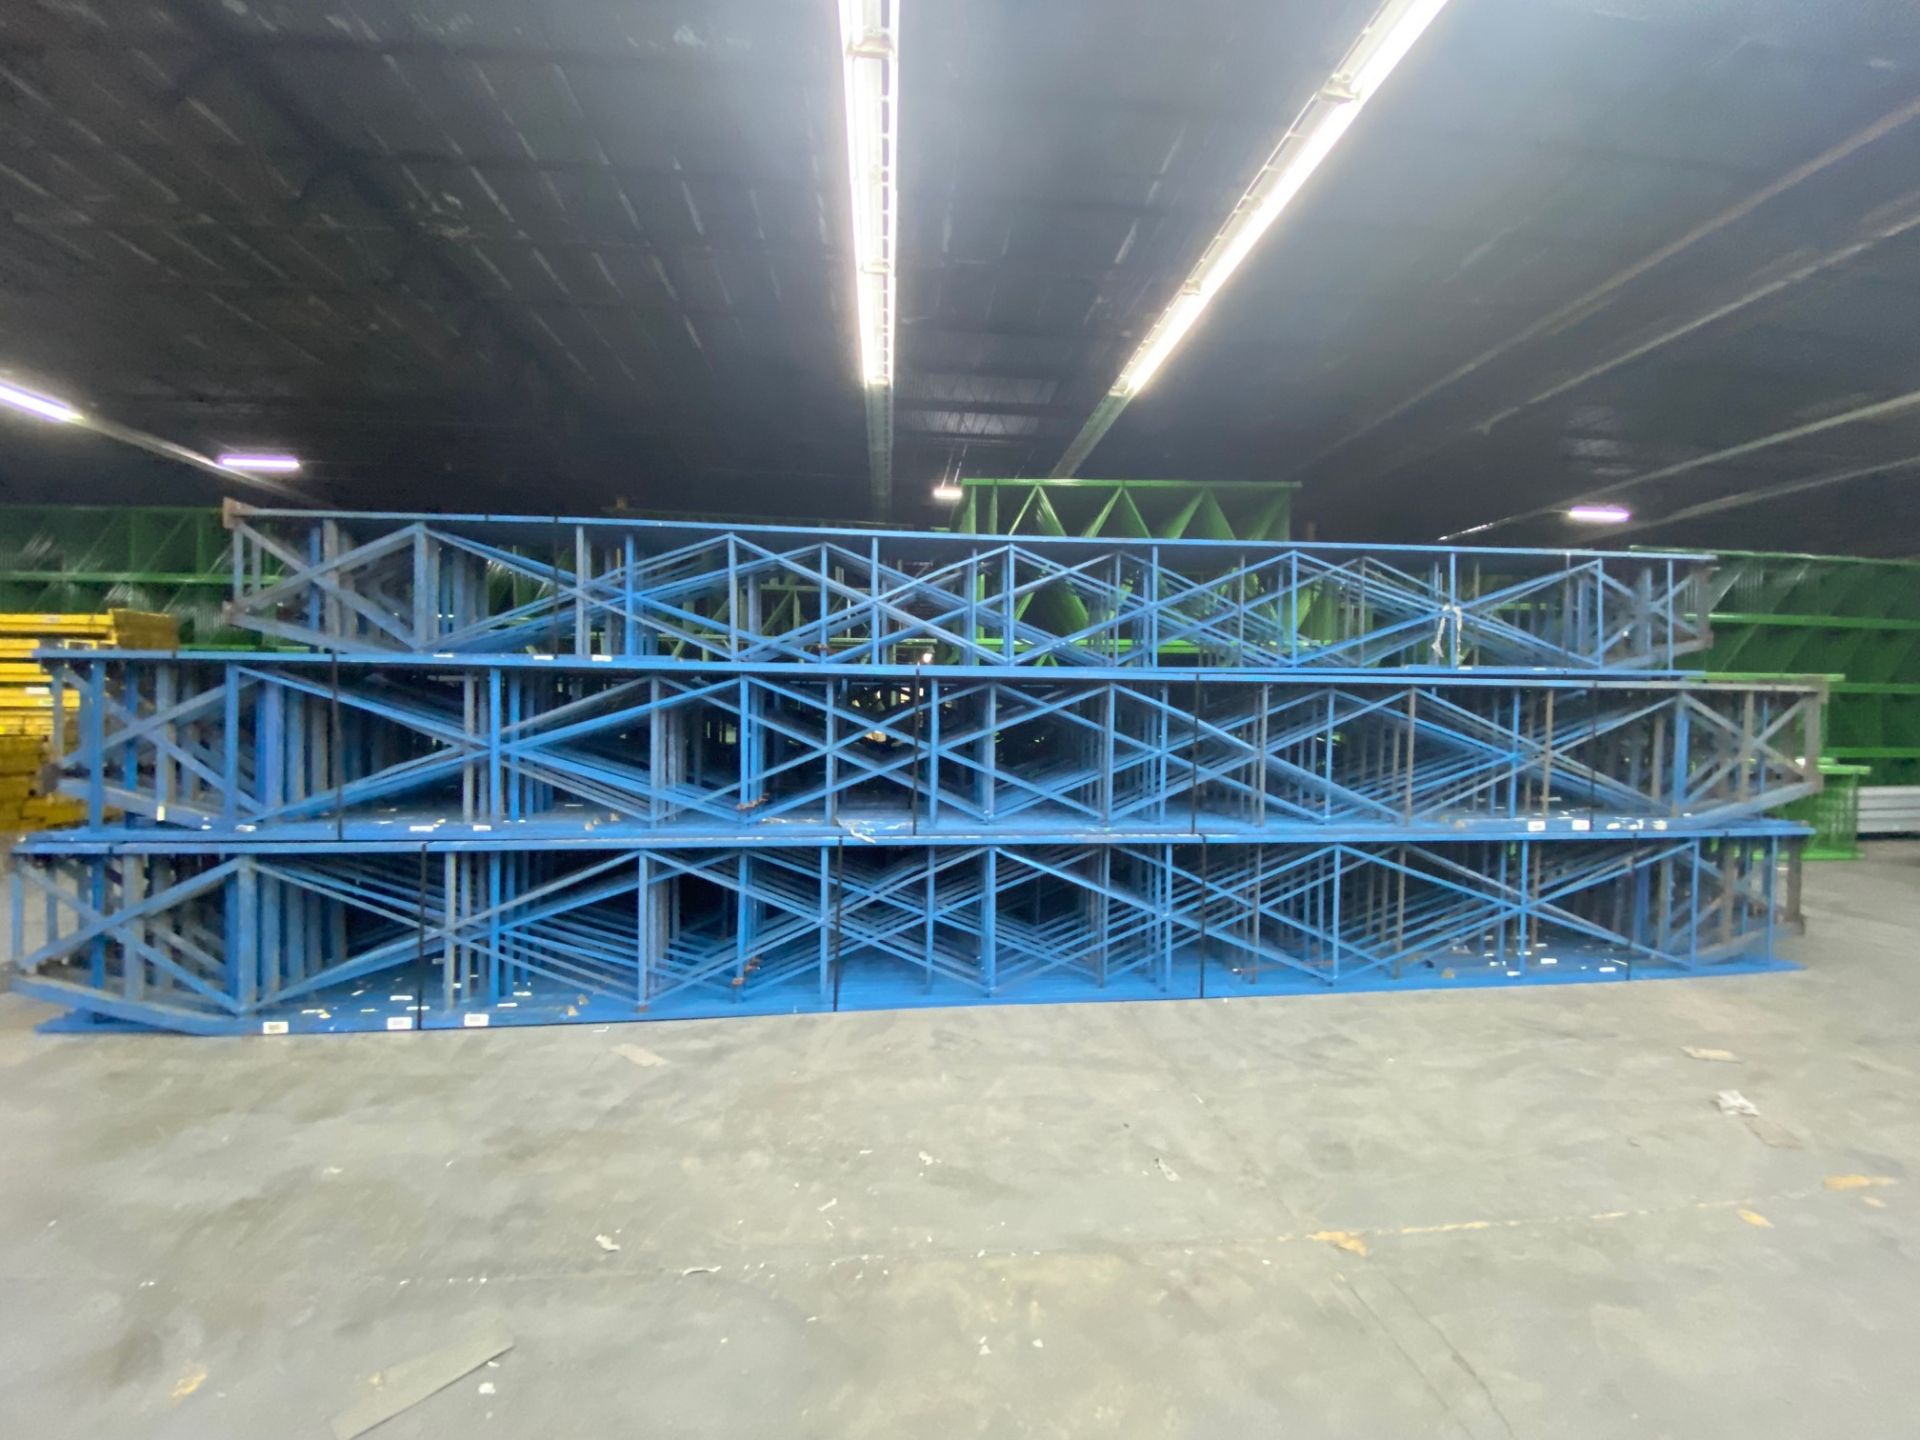 USED 15 PCS OF STRUCTURAL UPRIGHT. SIZE 30'H TO 33'H X 36"D, BLUE